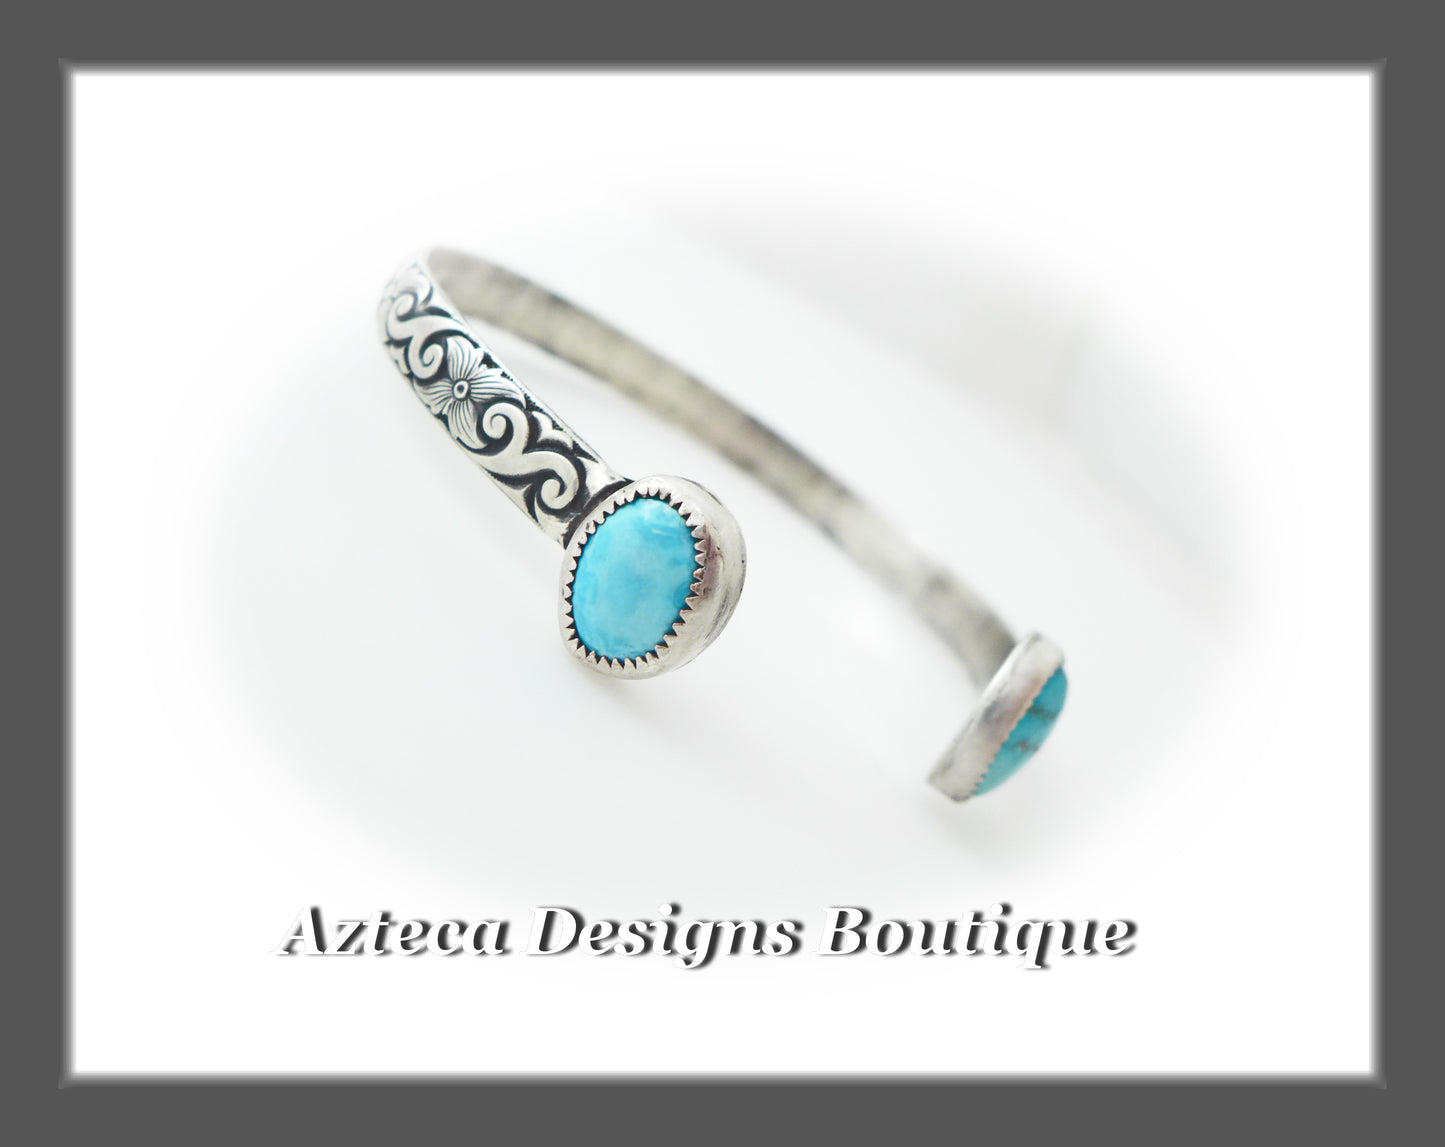 Stormy Mountain Turquoise + Sterling Silver + Hand Fabricated Cuff Bracelet